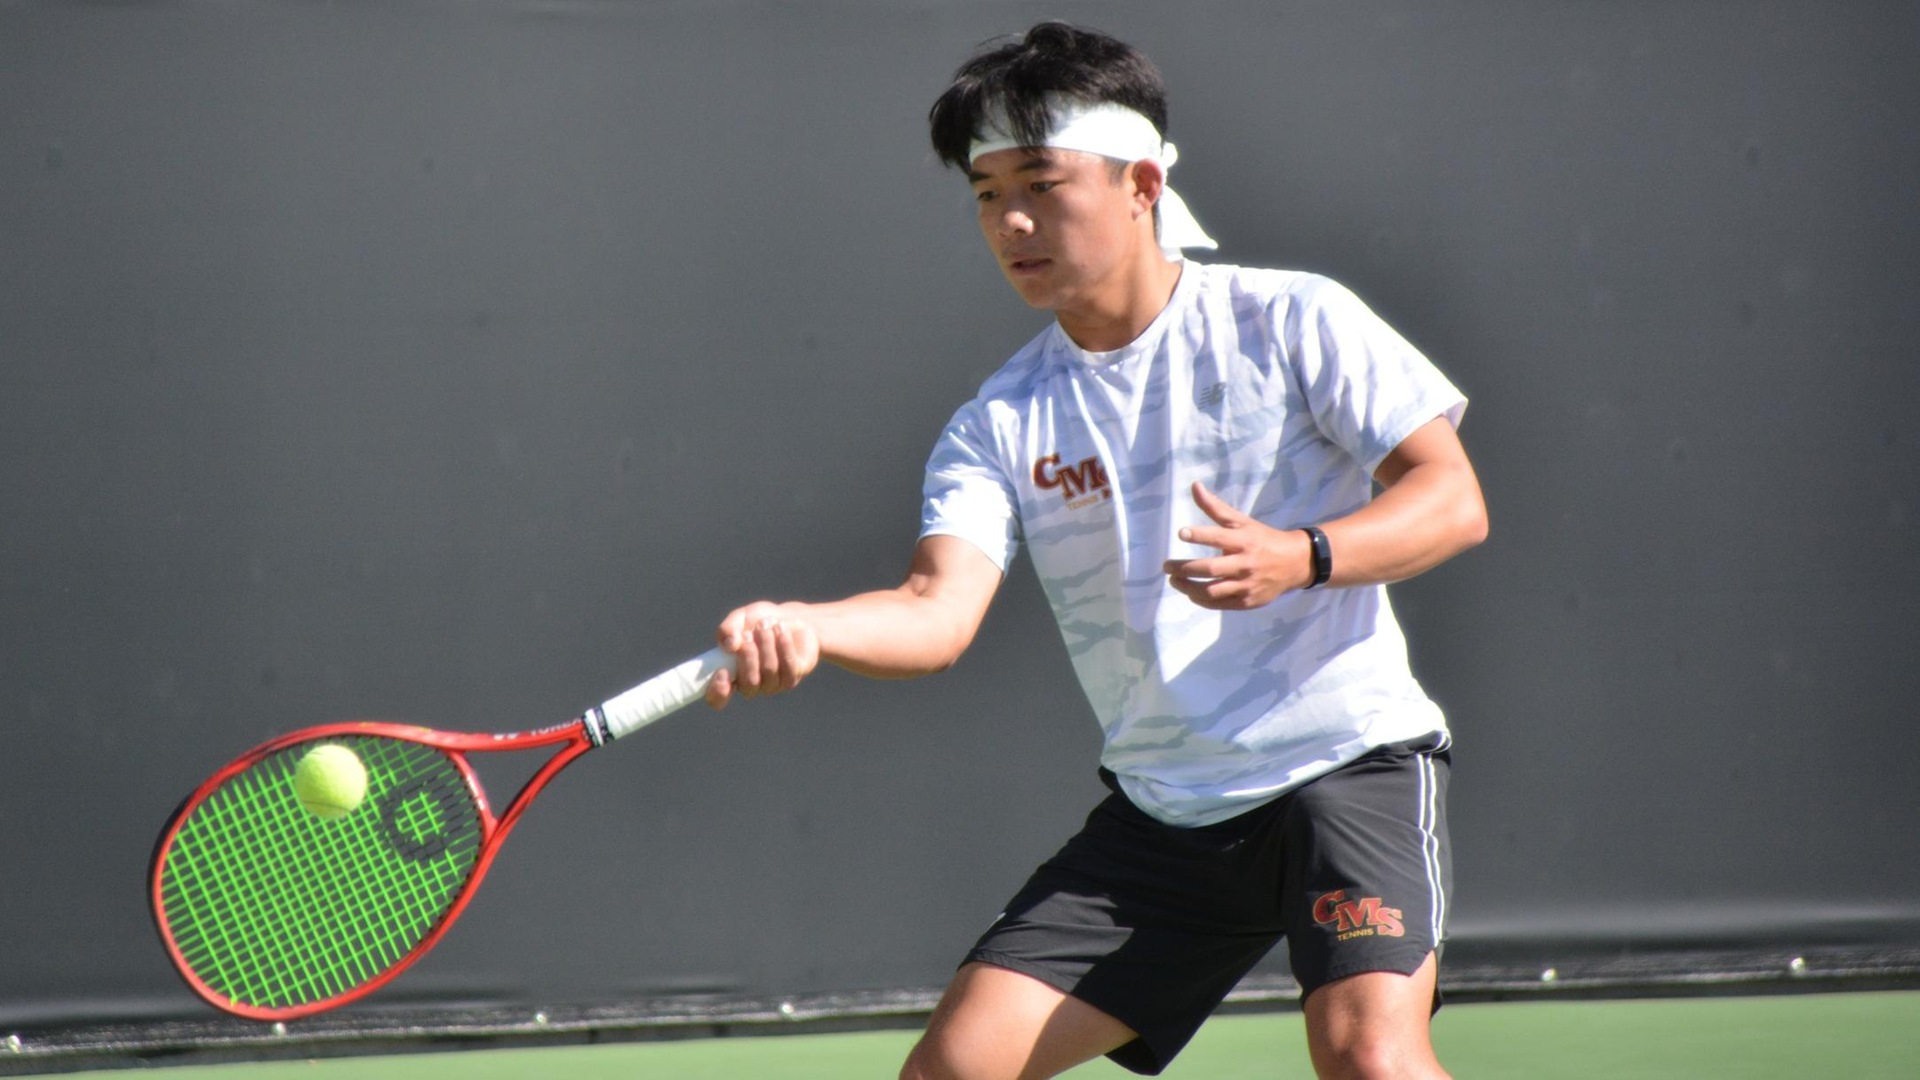 Michael Hao had singles wins in both matches